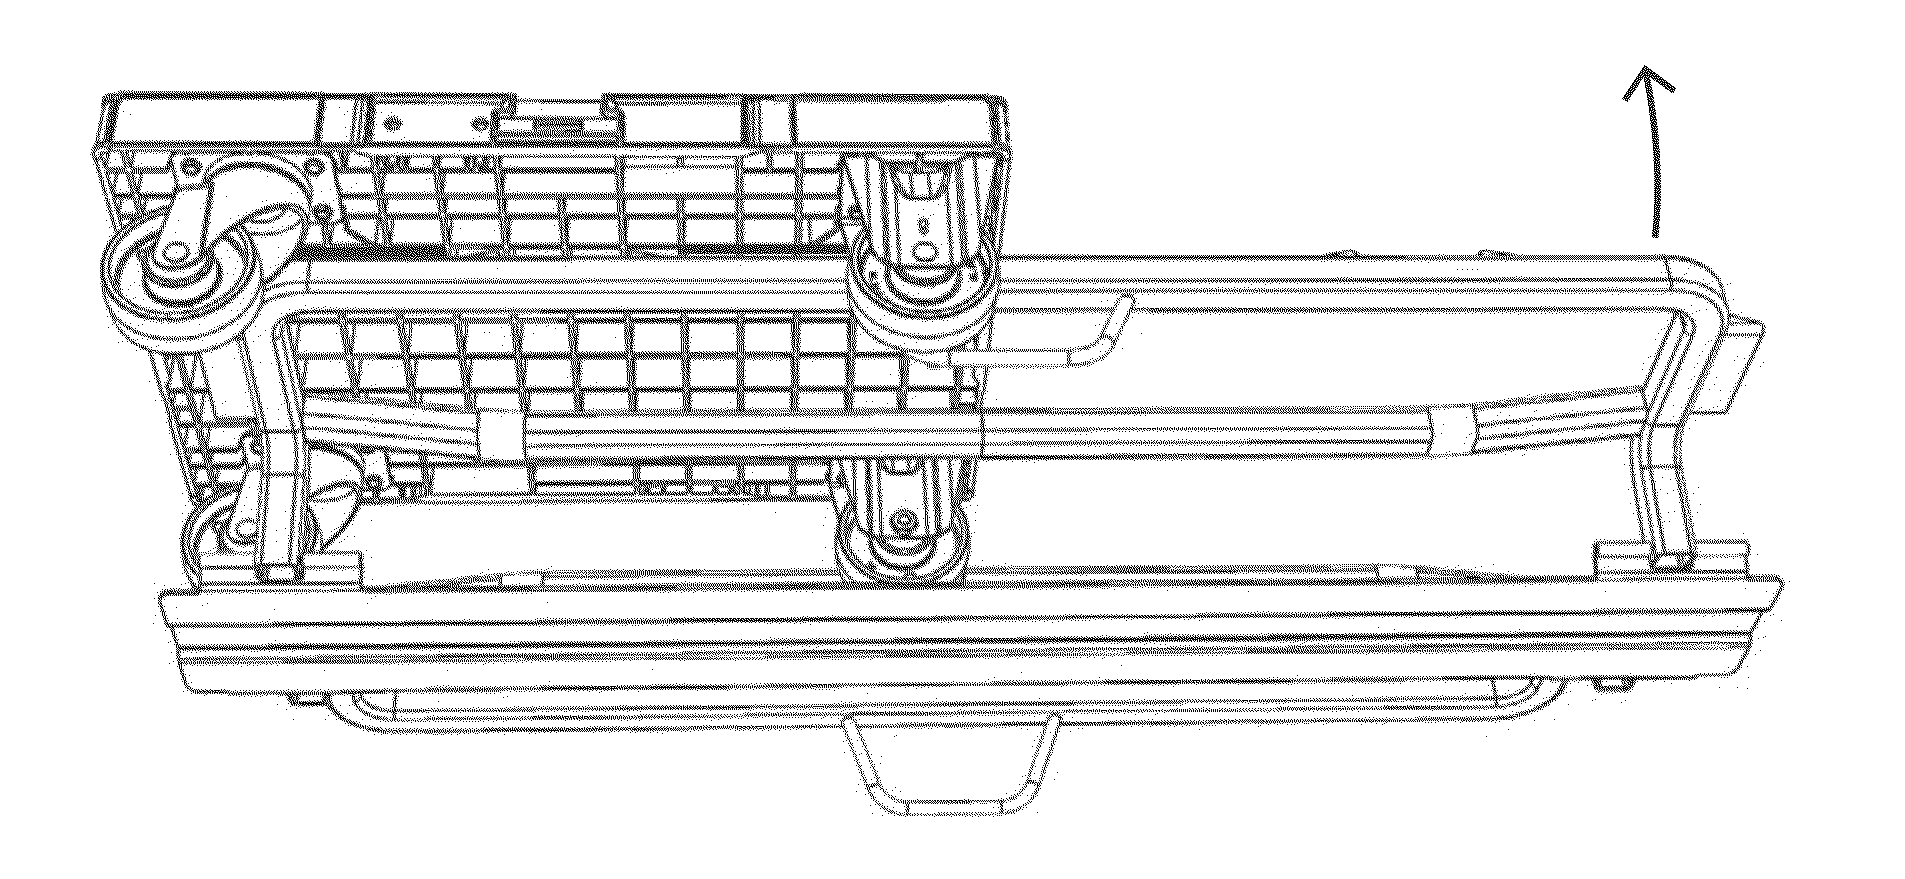 Adaptor pallet and method of transporting a plurality of dollies by means of an adaptor pallet